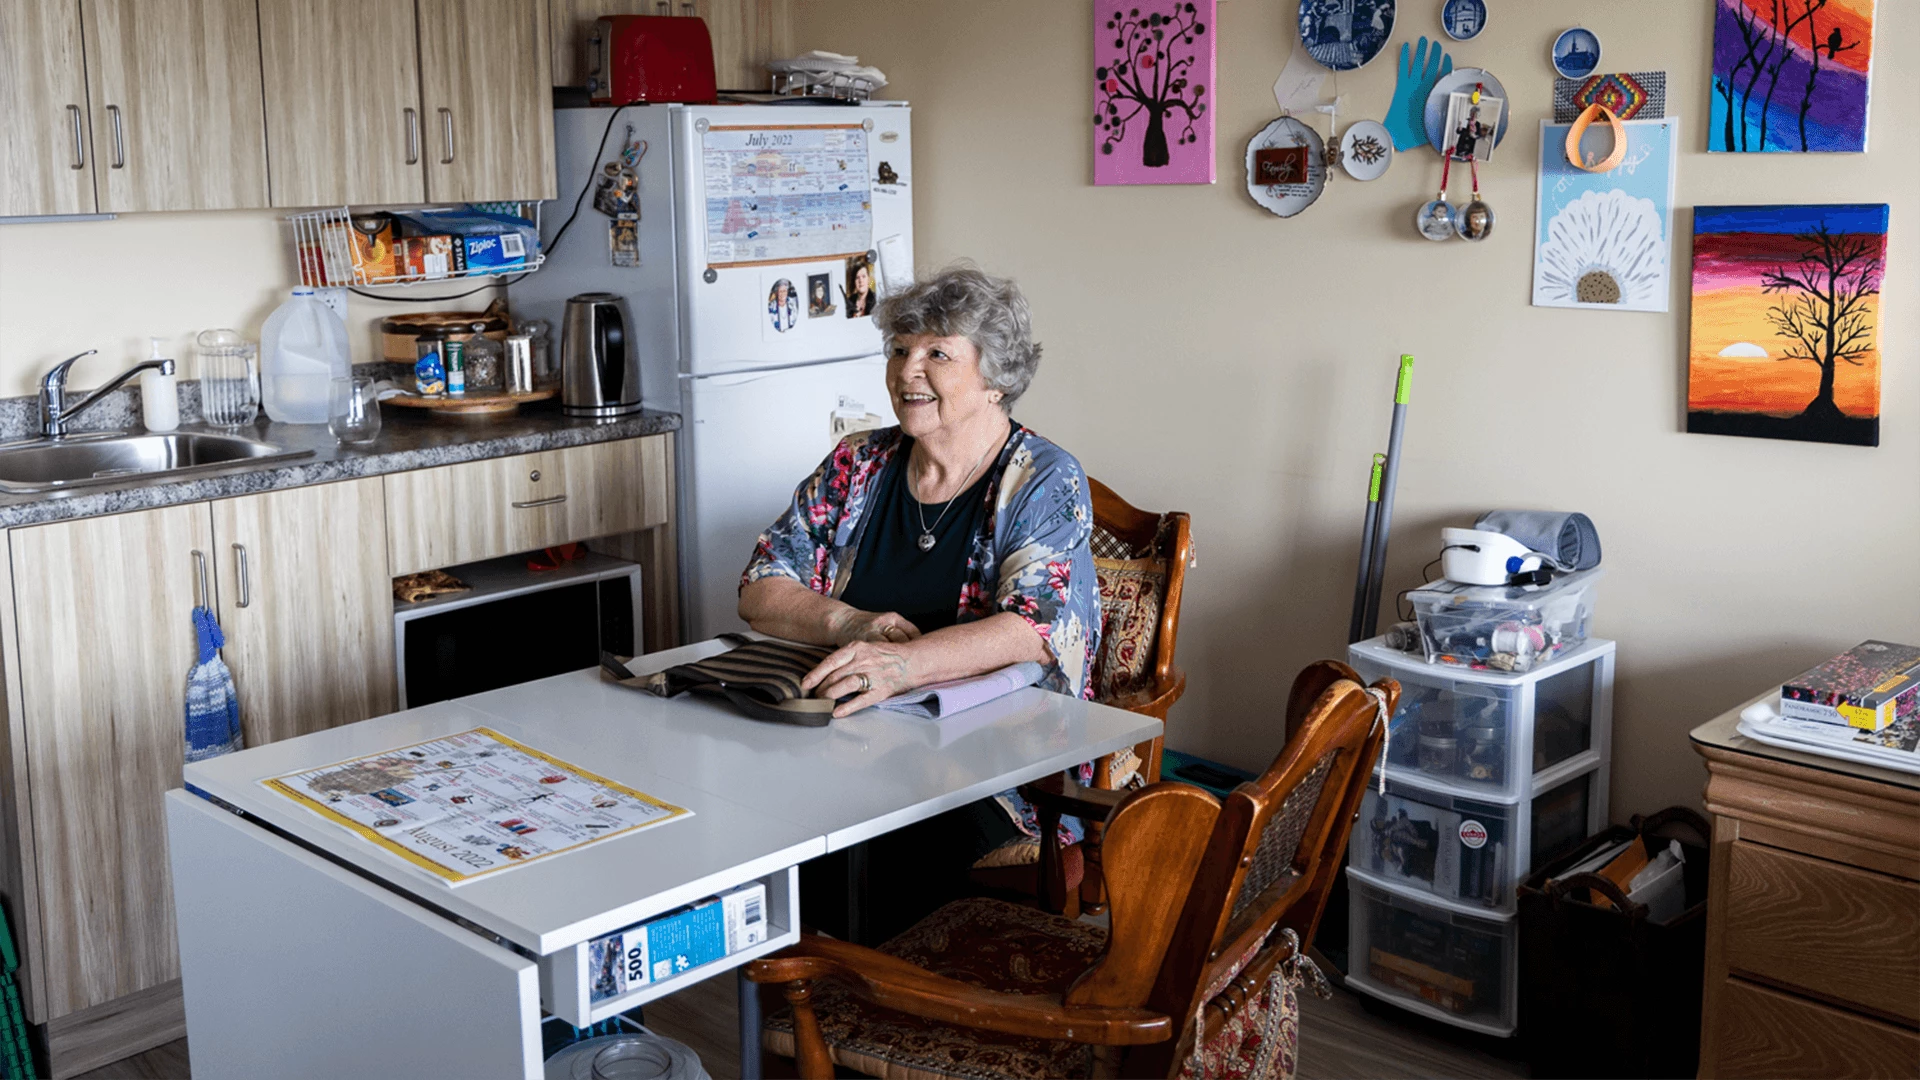 An elderly lady sitting on a dining table in her room